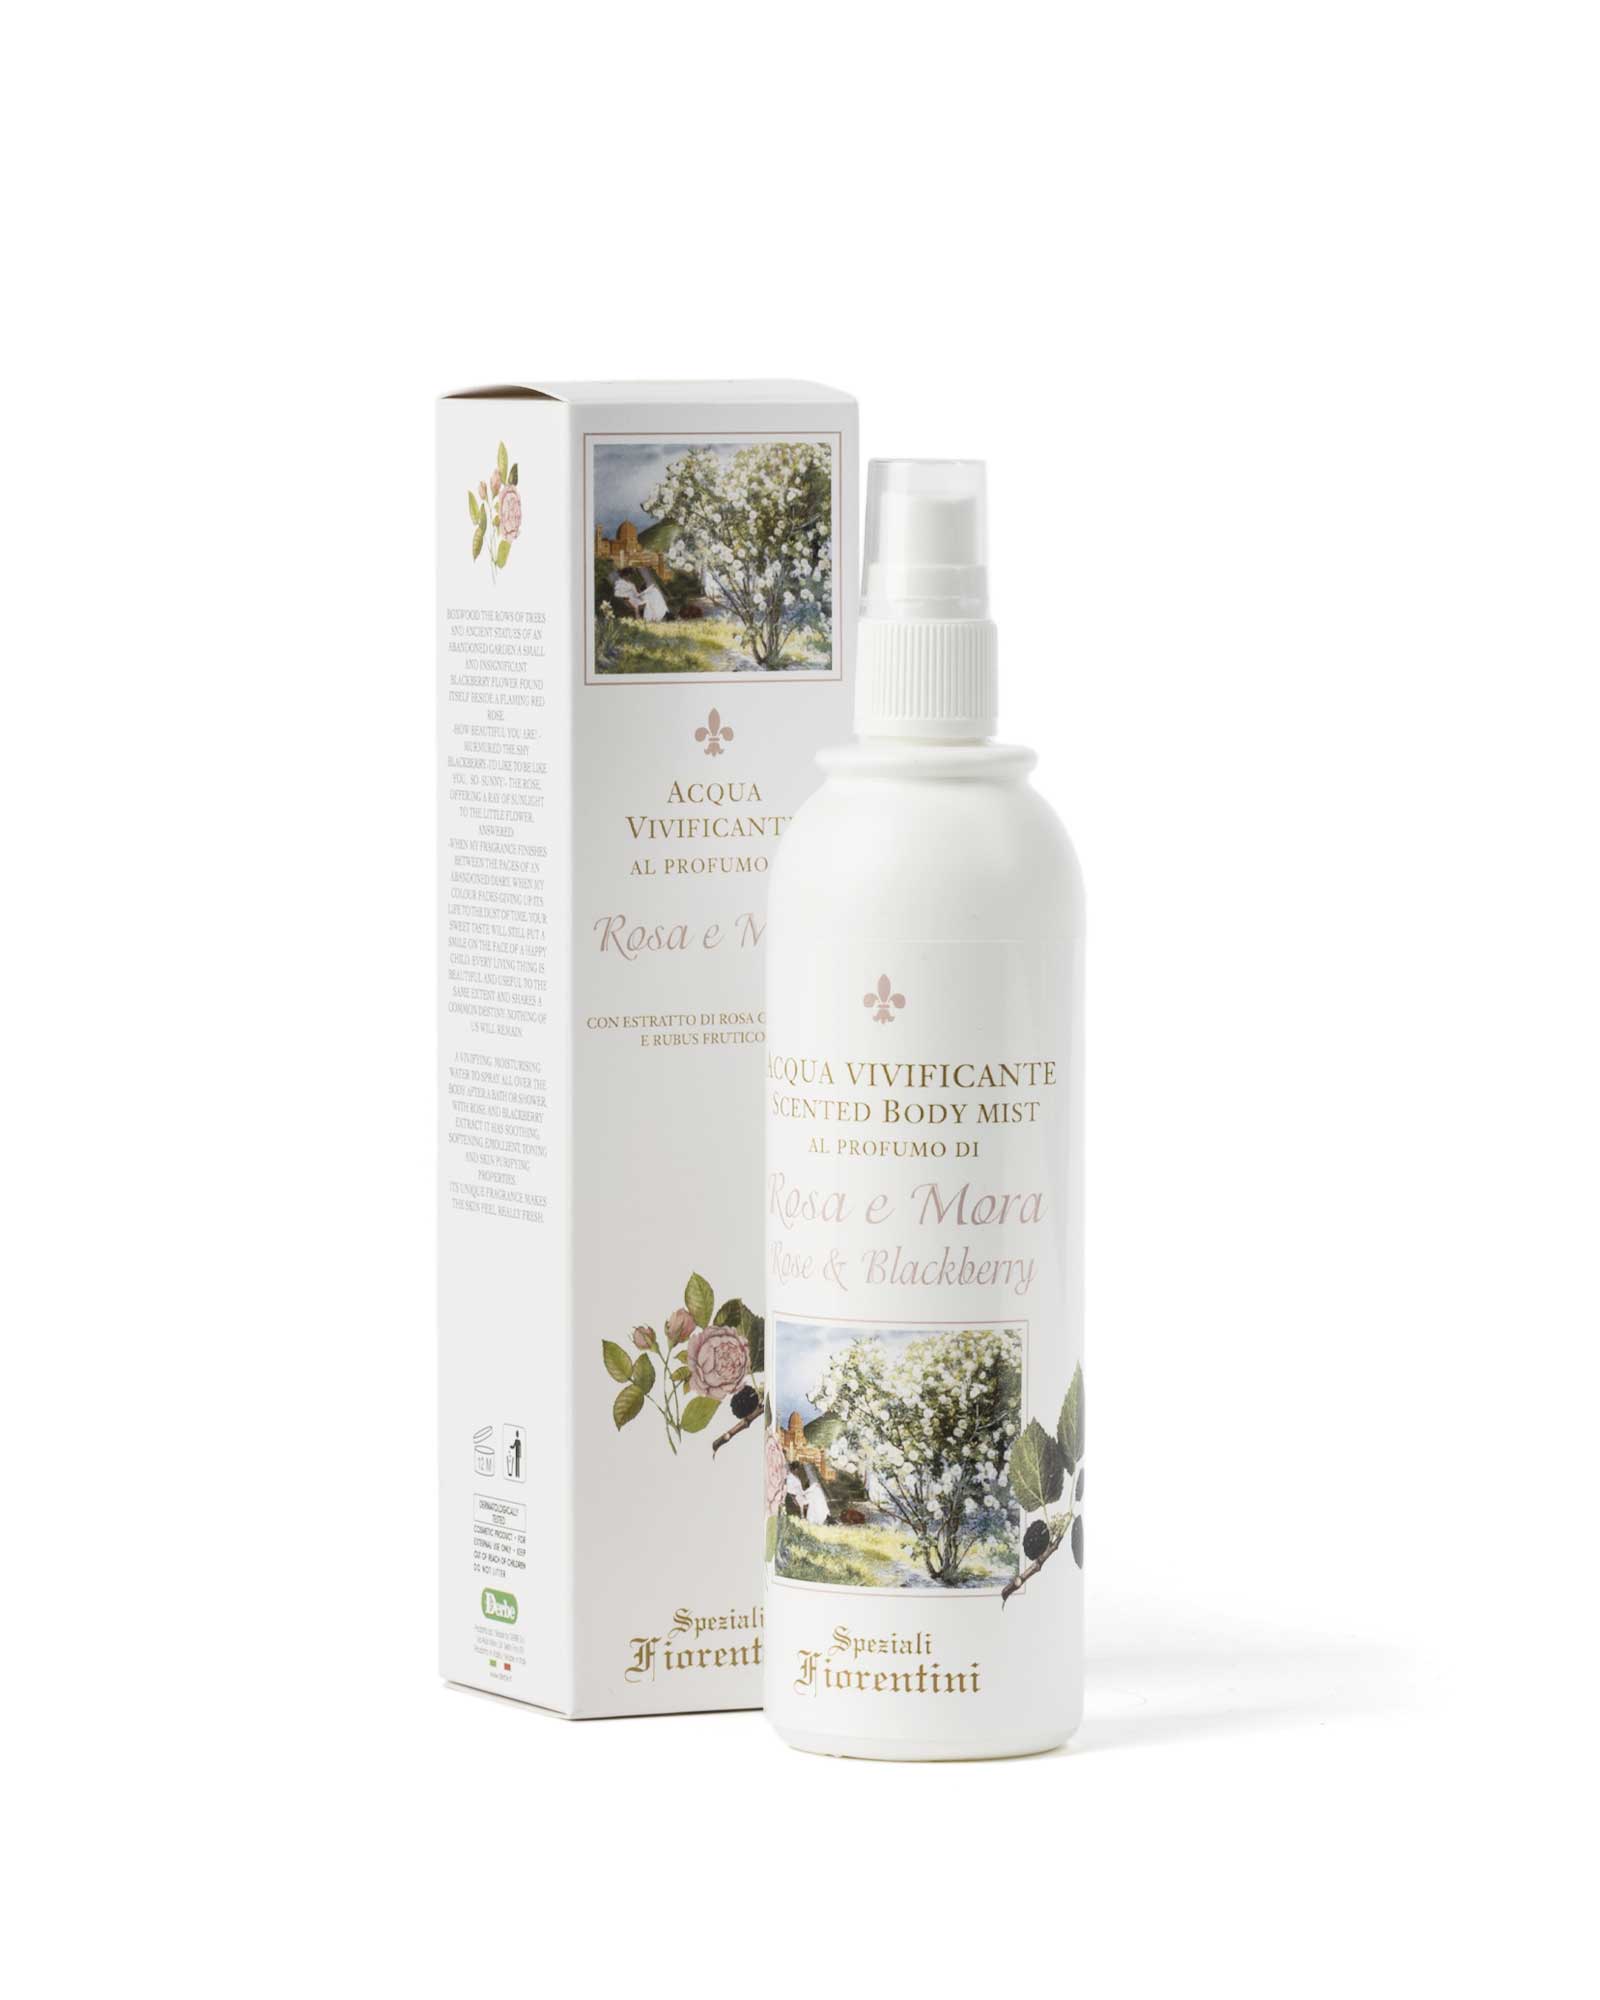 Rose and blackberry life-giving water - Florentine apothecaries - Derbe